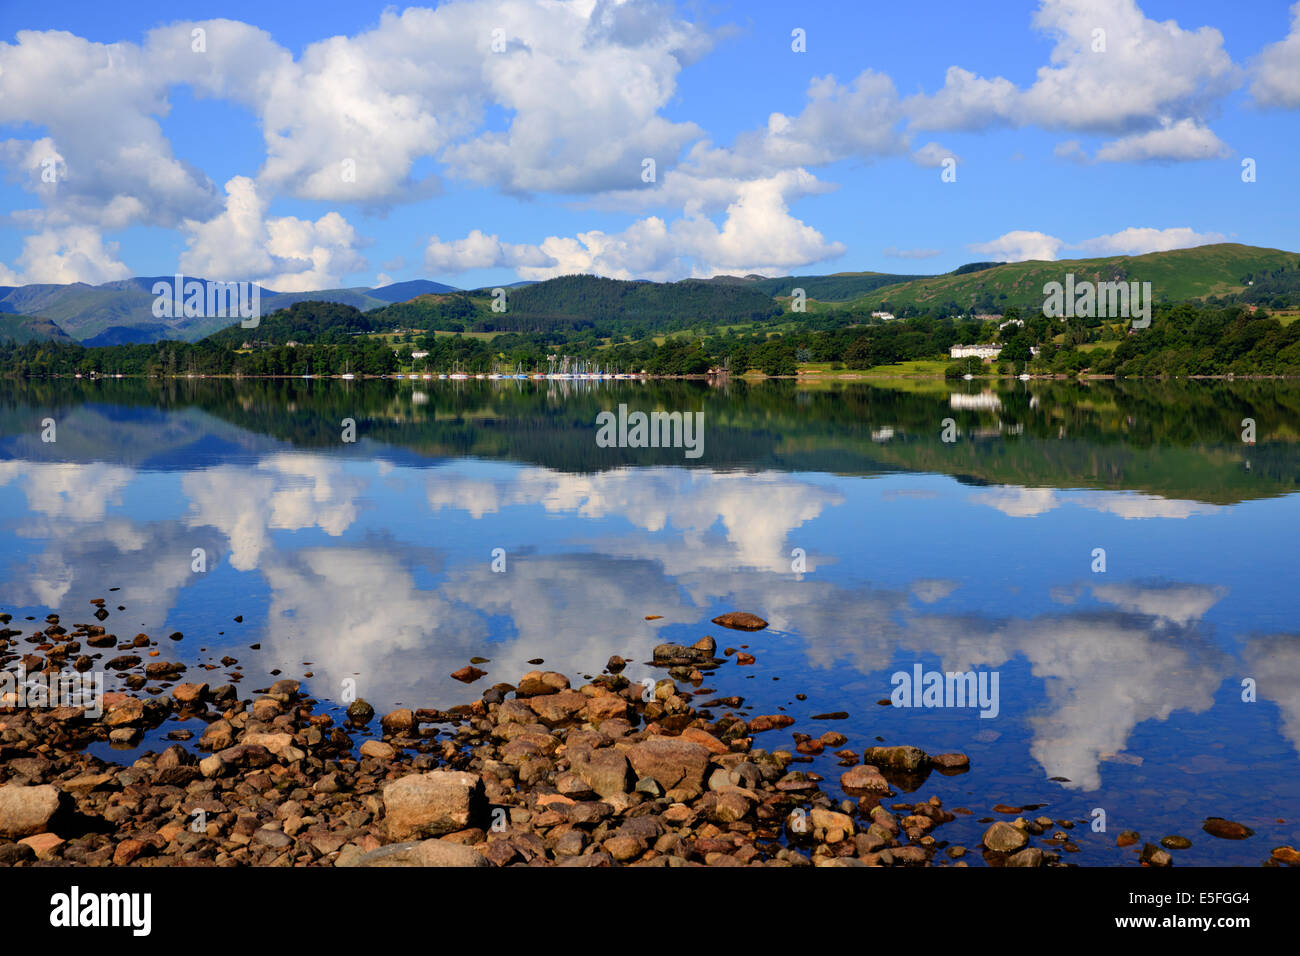 English countryside lake District Ullswater with mountains and blue sky on beautiful still summer day with reflections Stock Photo